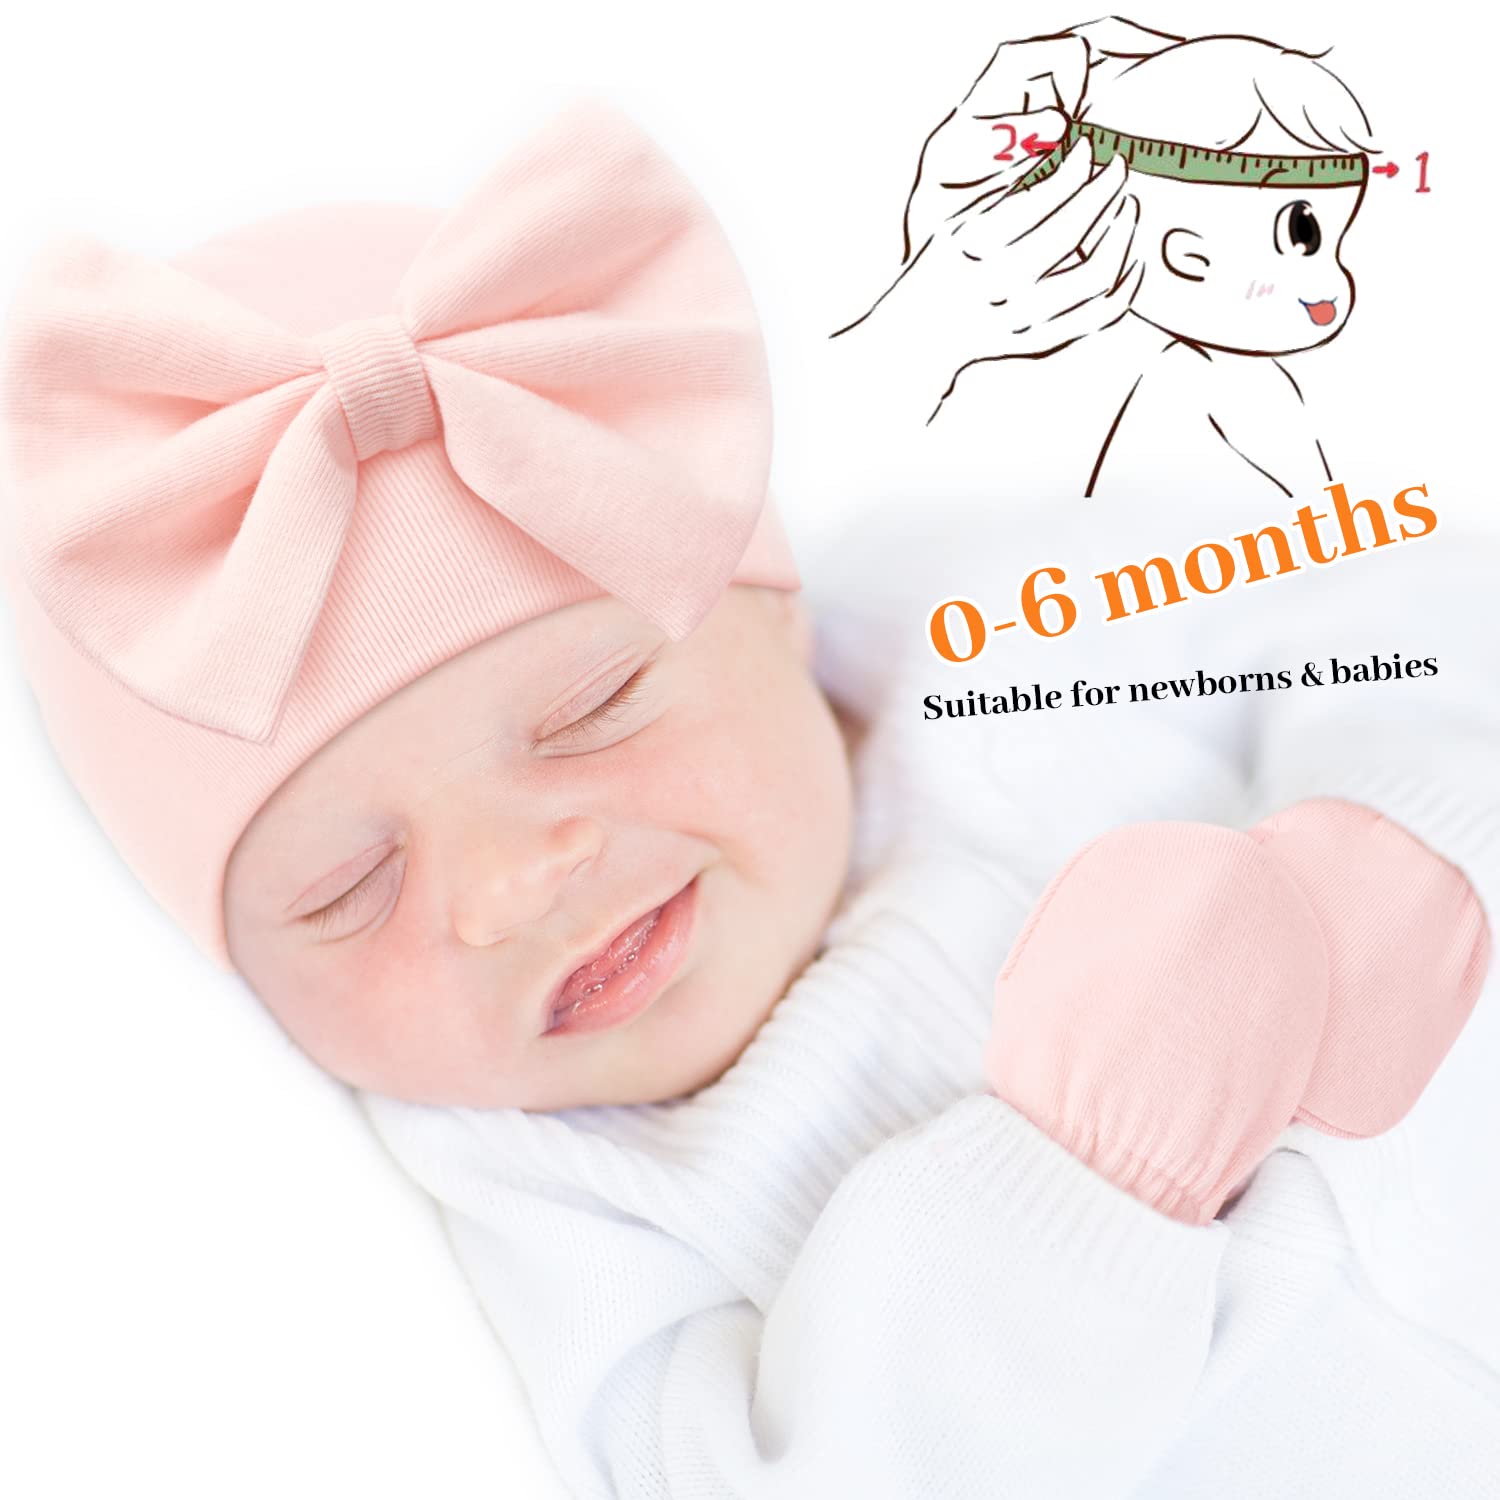 Newborn Hospital Hats Gloves Baby Infant Bow Beanie Cotton Caps No Scratch Hat Mittens Set for 0-6 Months